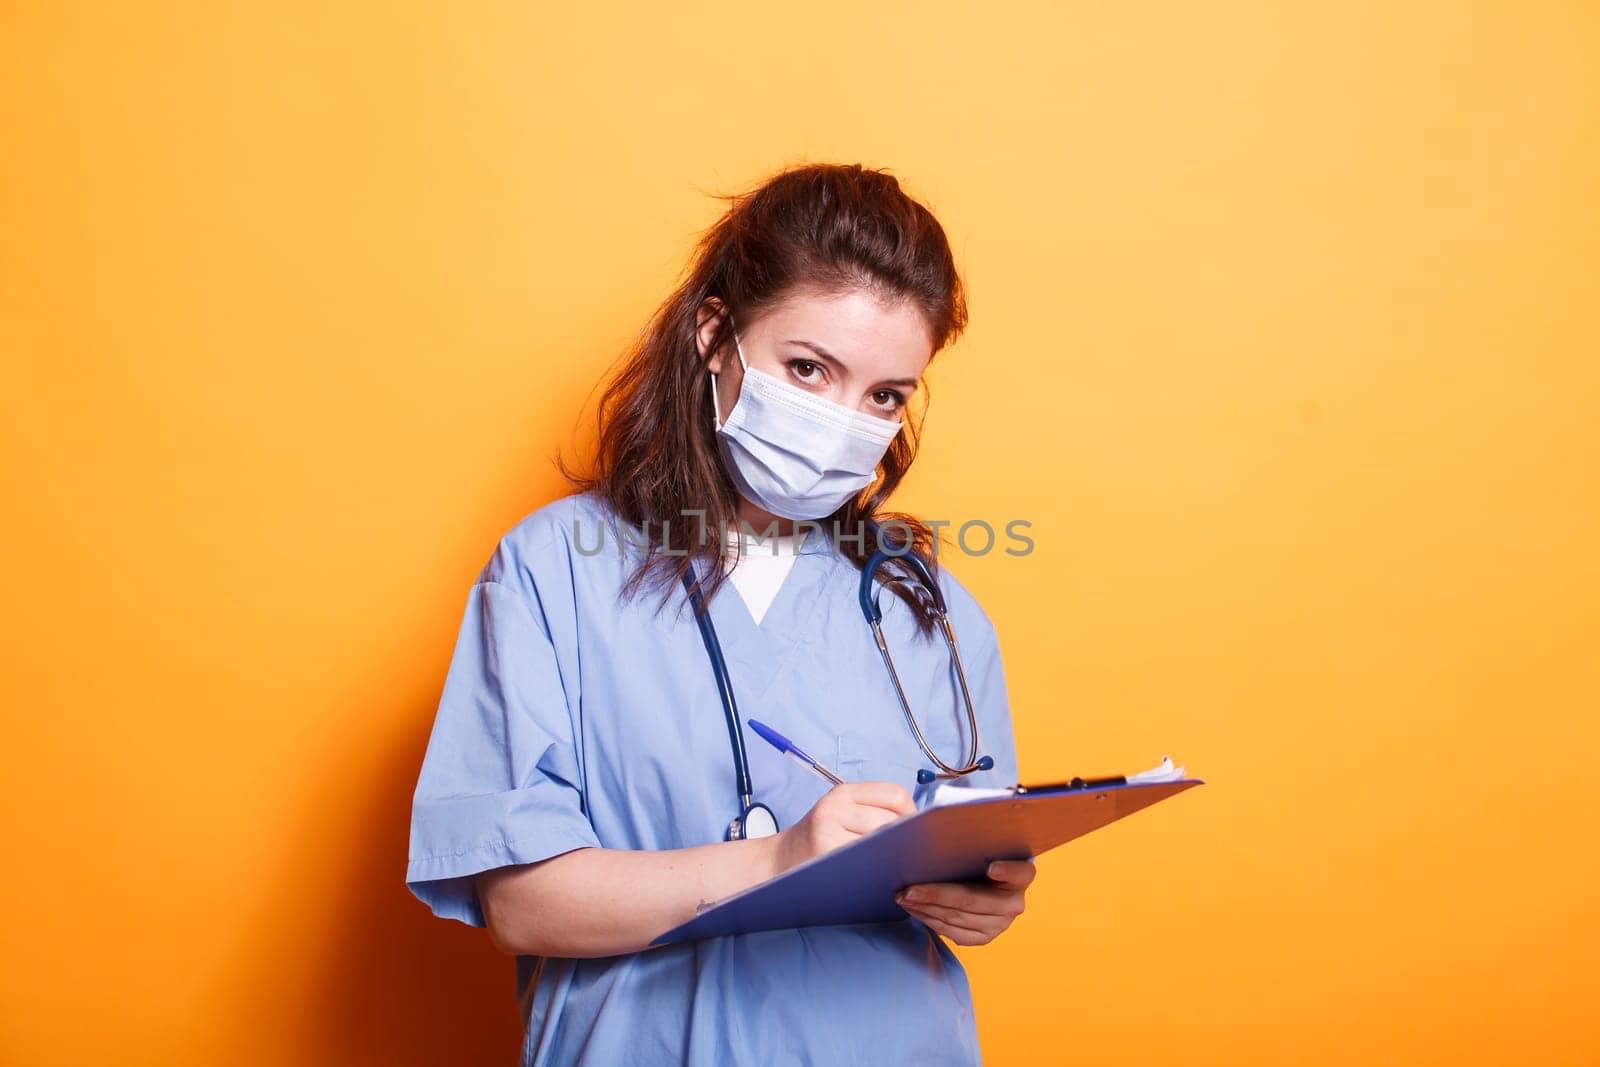 Woman doctor in blue scrubs taking notes on clipboard files, standing against isolated background. Healthcare specialist with face mask writing on medical documents, looking at camera.